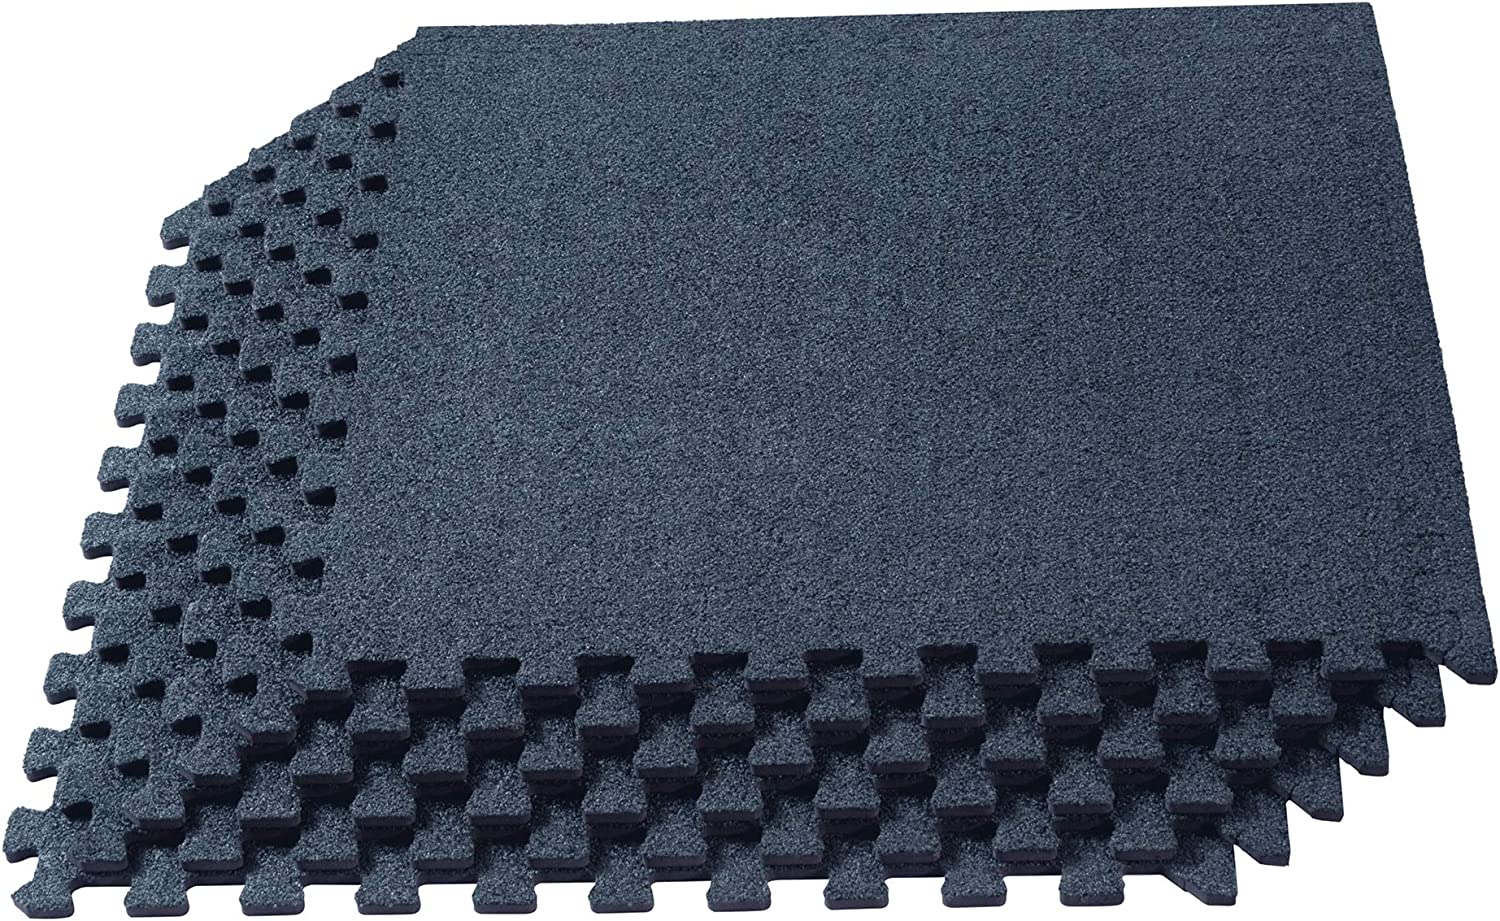 We Sell Mats Thick Interlocking Foam Carpet Tiles Durable Carpet Squares Anti Fatigue Support for Home Office or Classroom Use